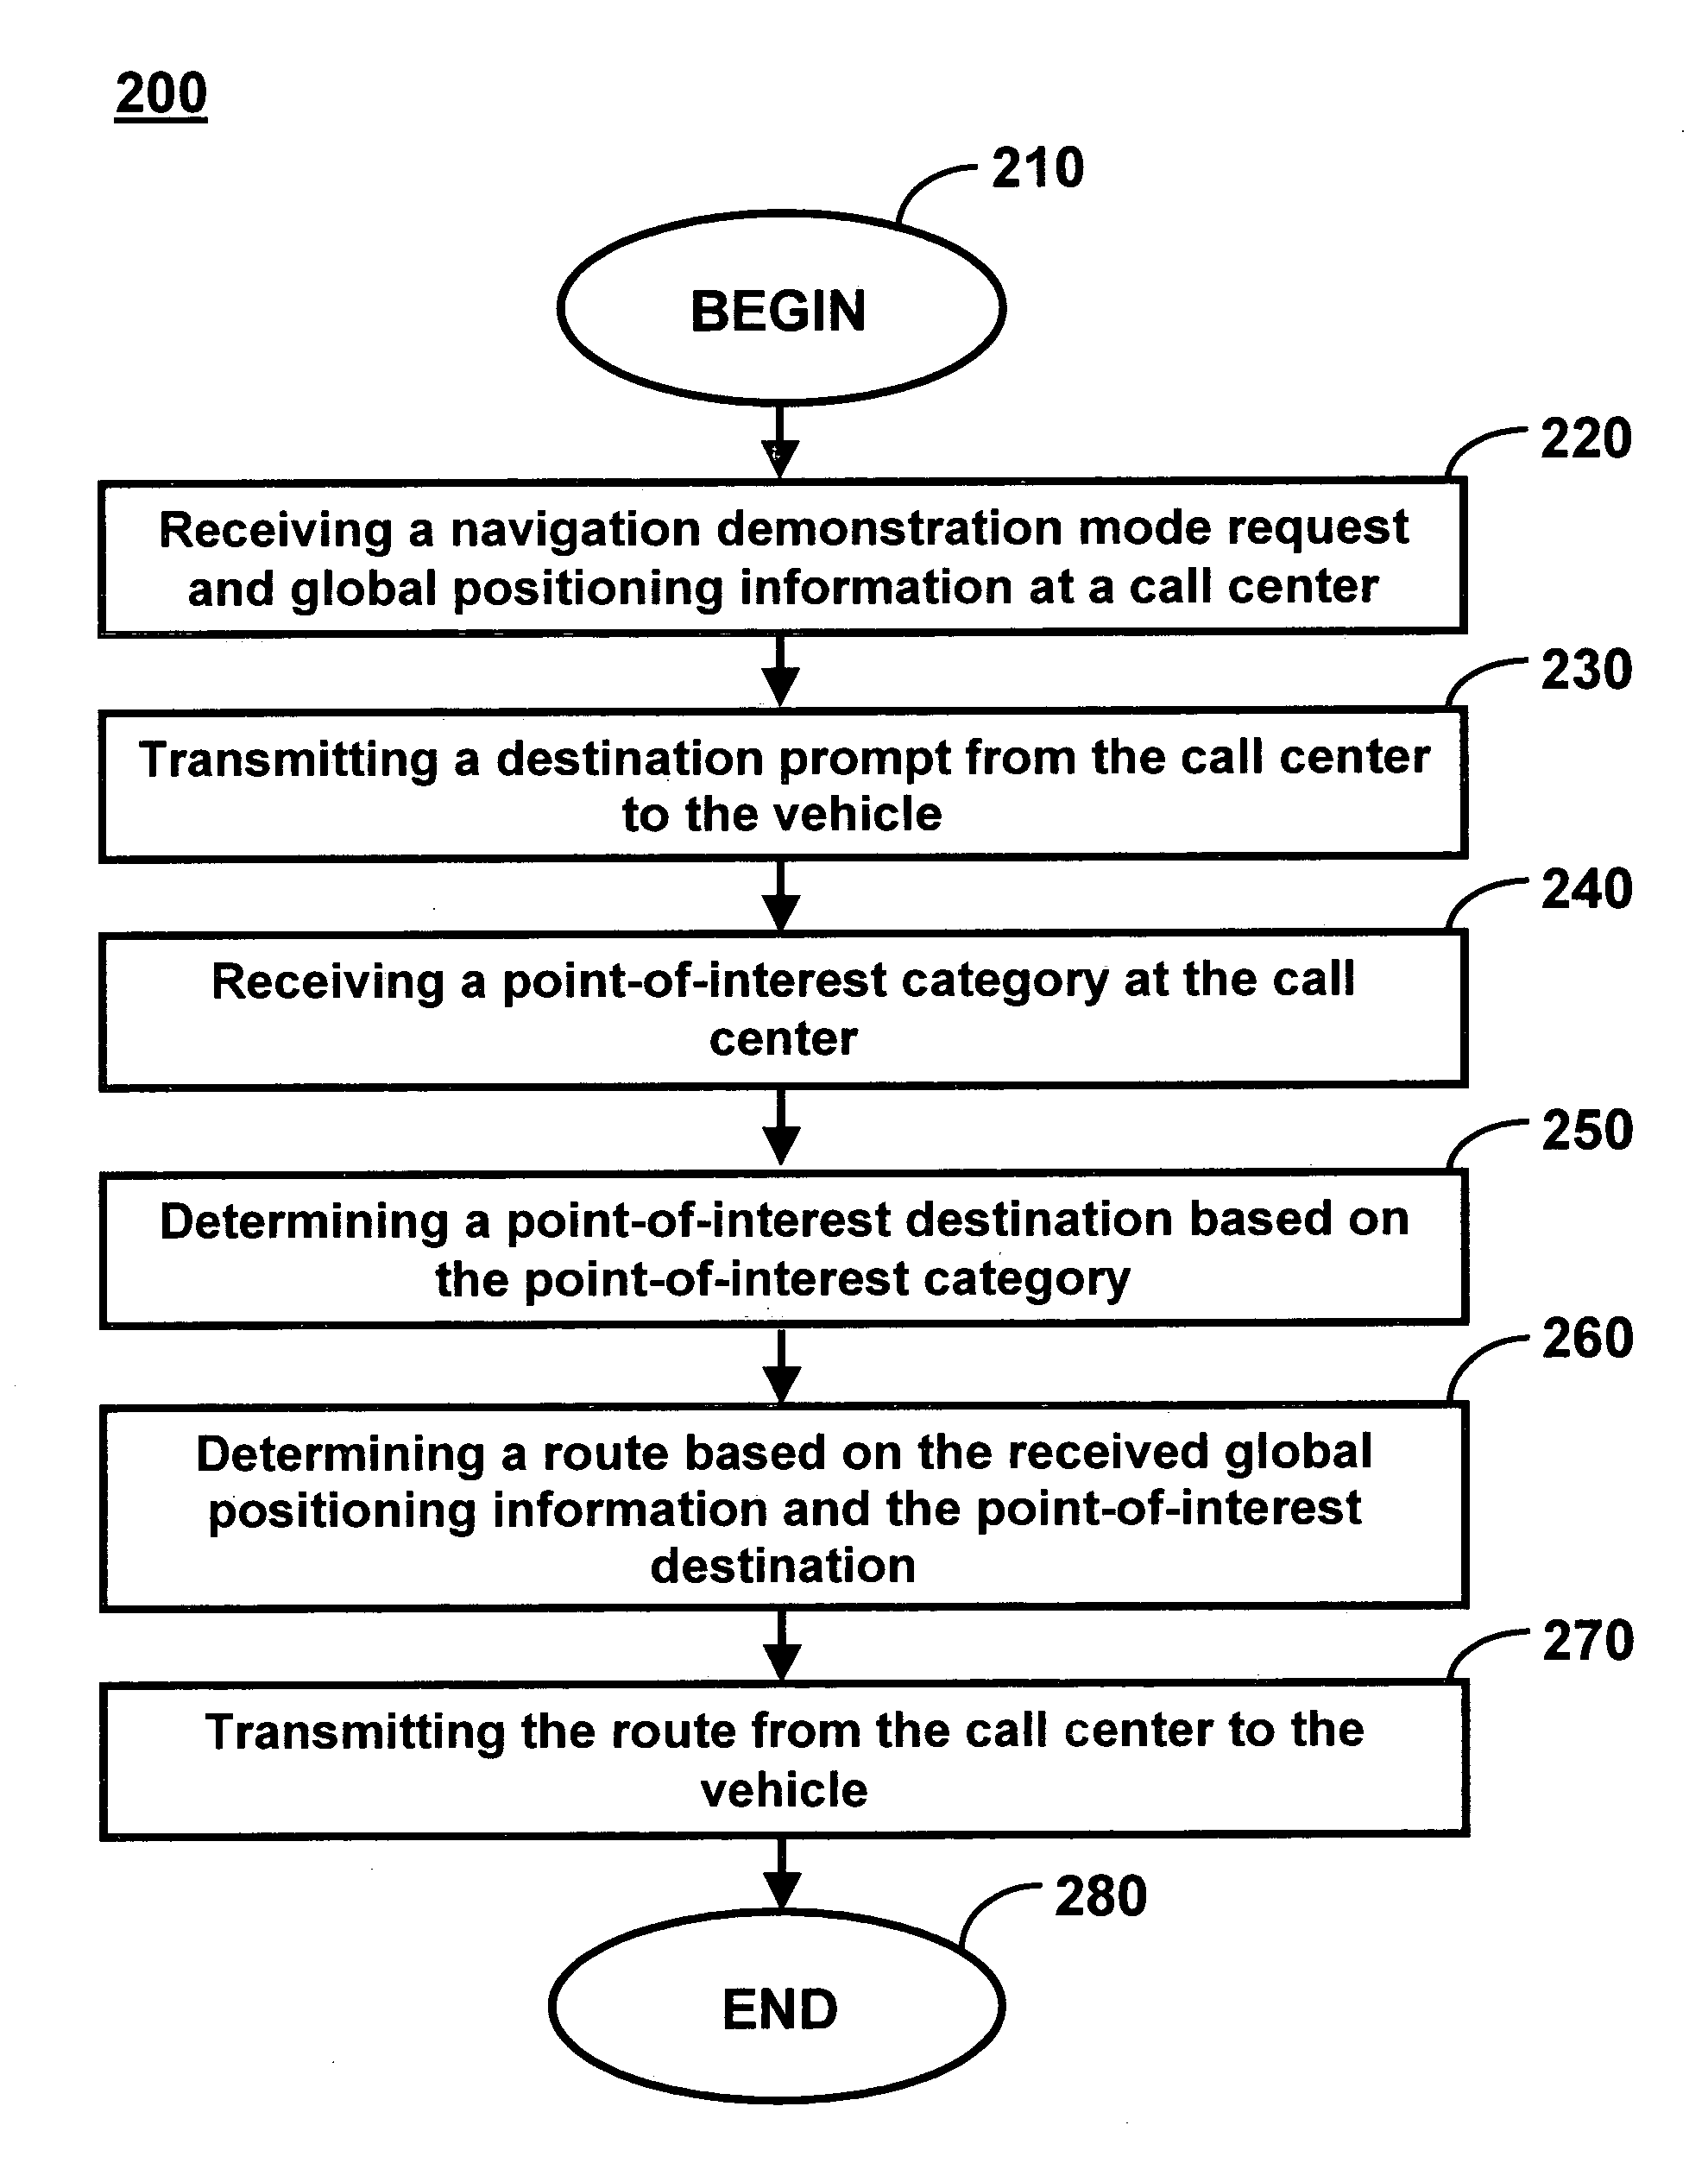 Method and system for provisioning turn-by-turn navigation demonstrations